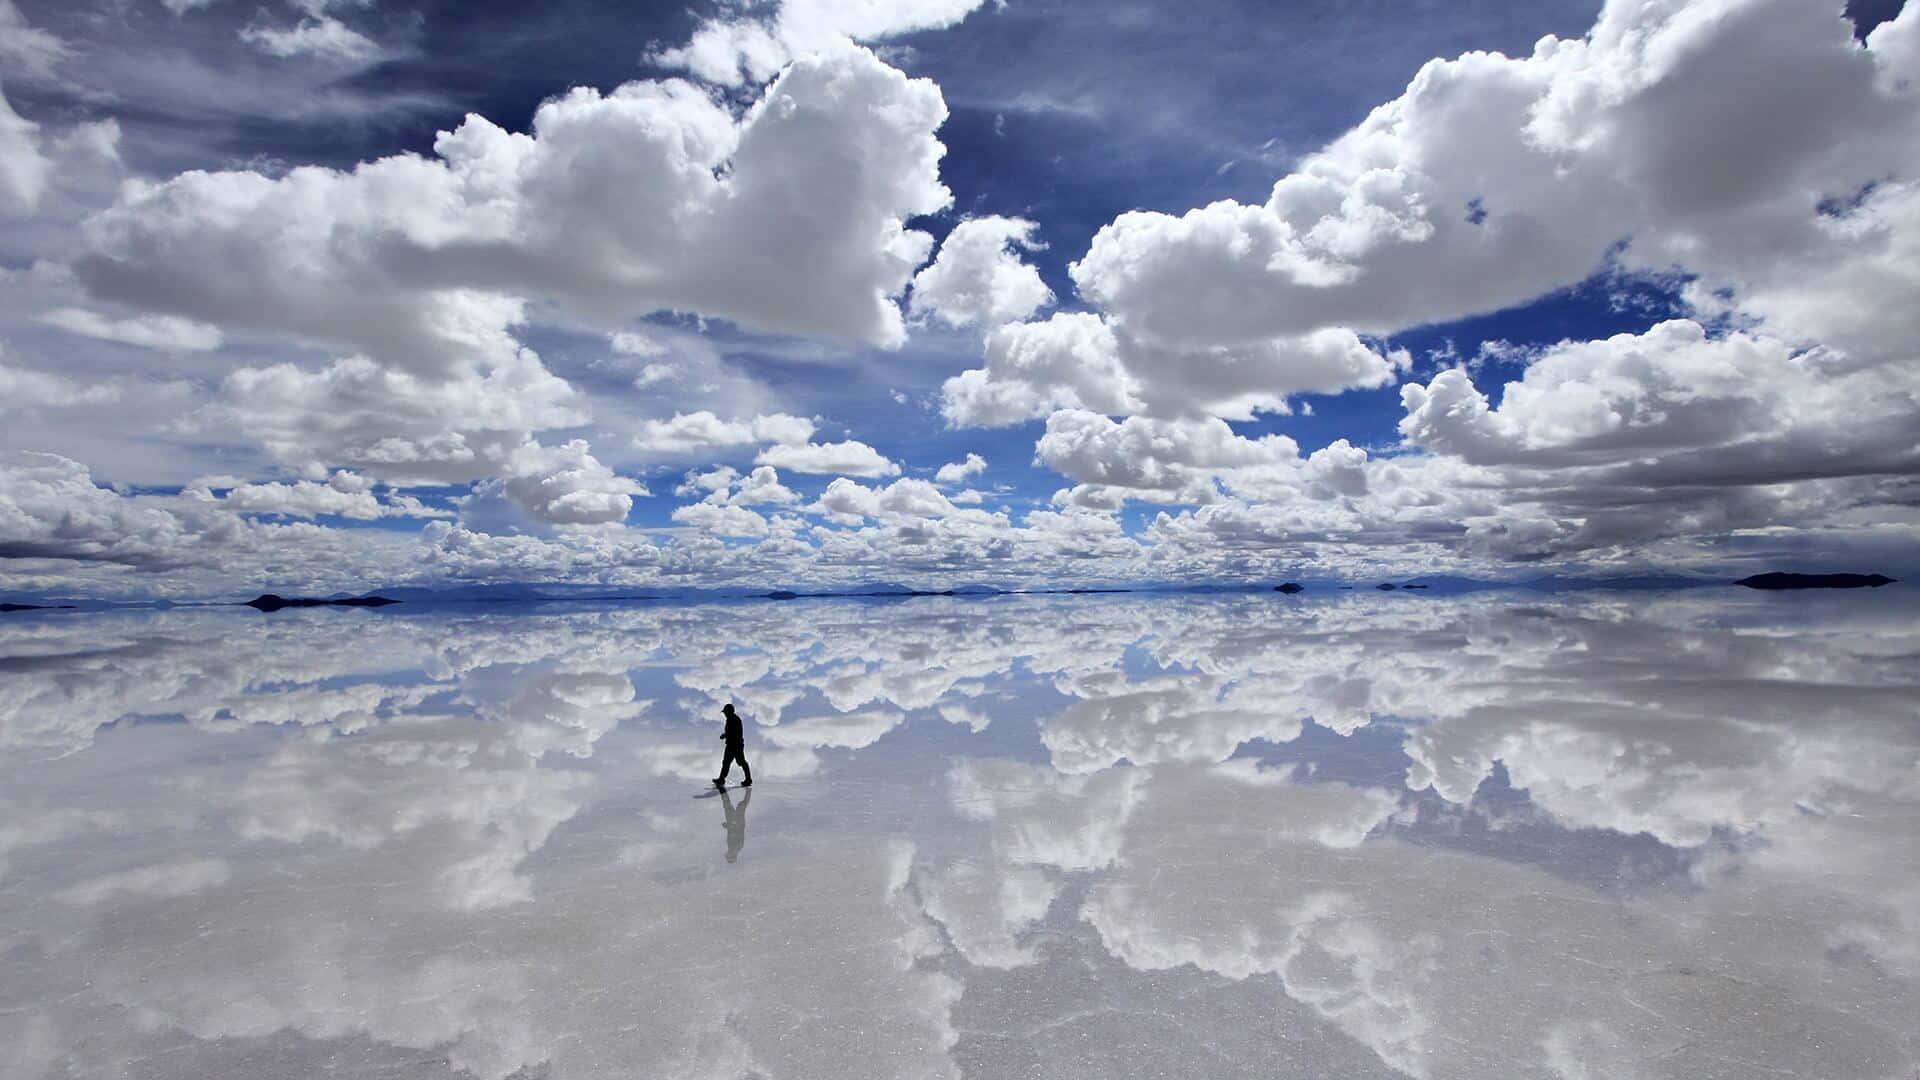 "A beautiful view of bright, white clouds in a majestic blue sky" Wallpaper